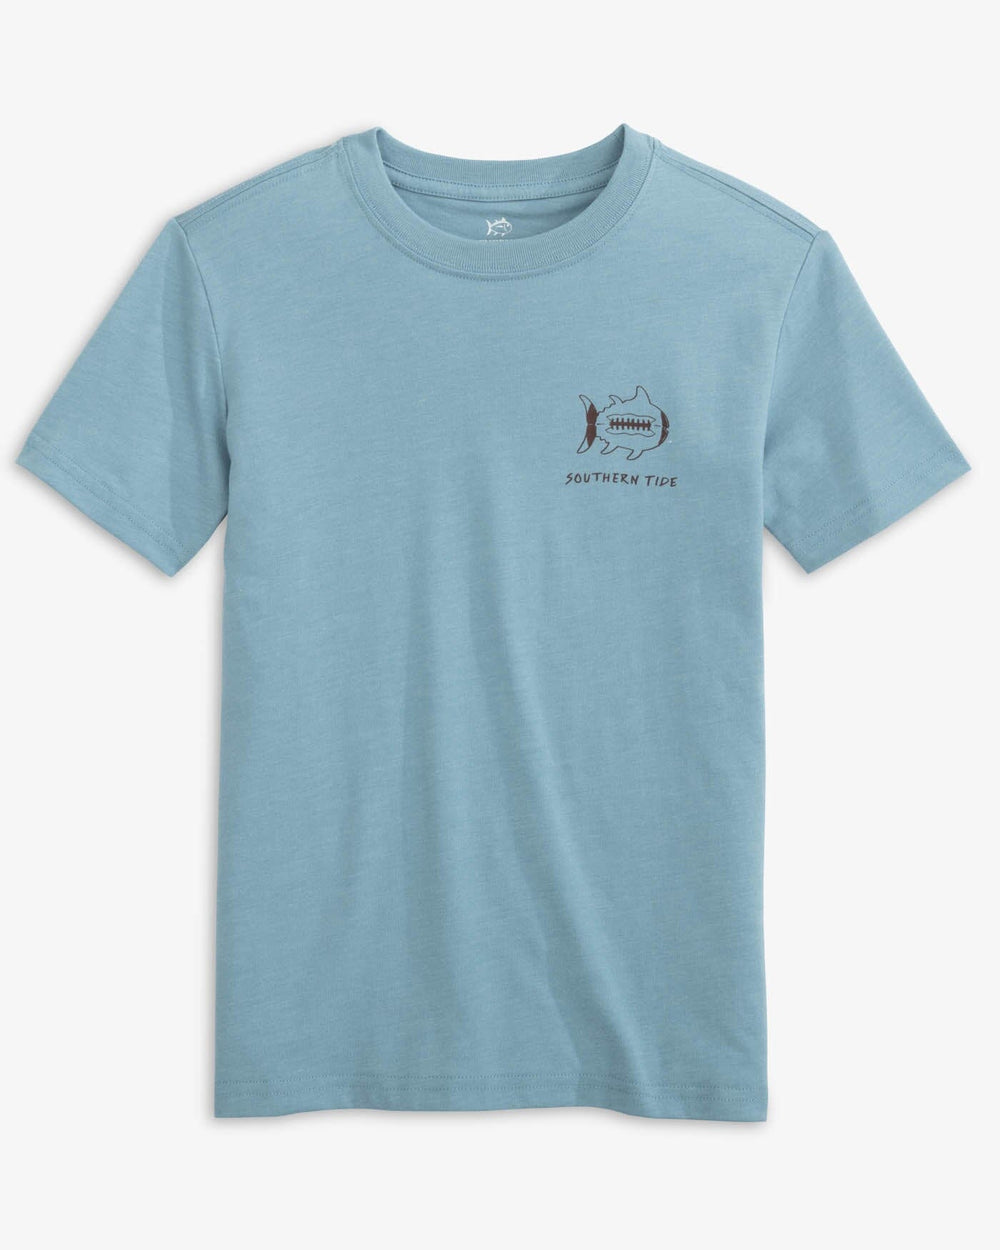 The front view of the Southern Tide Kids Sketched Football Heather T-Shirt by Southern Tide - Heather Blue Shadow